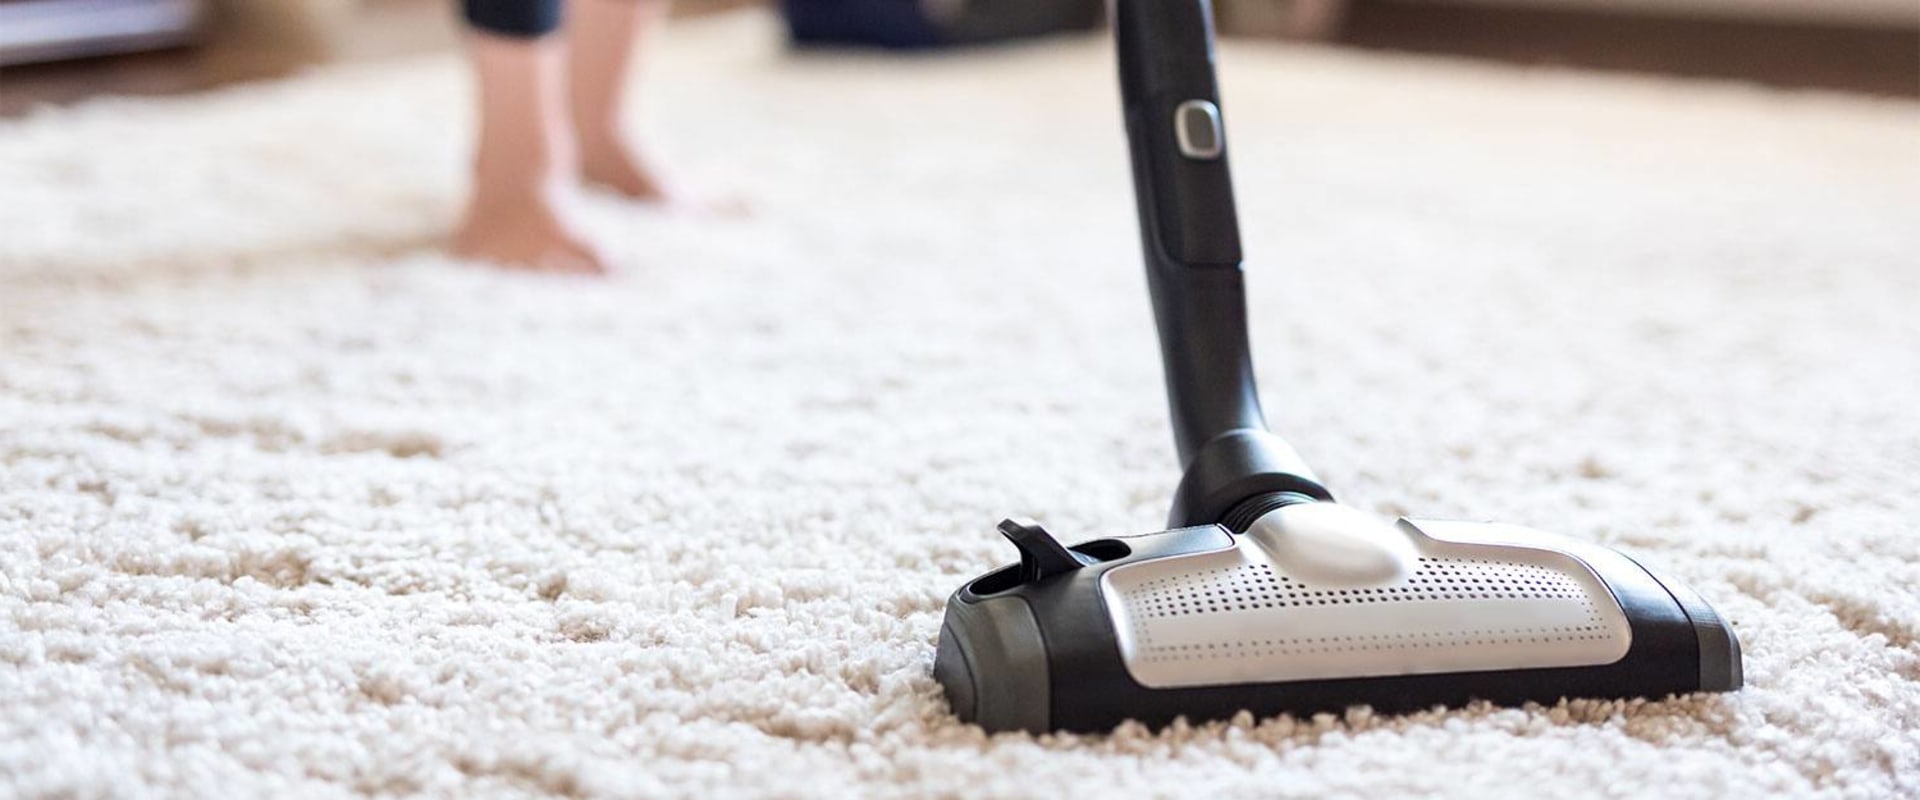 Is it Dangerous to Inhale Carpet Cleaner? - An Expert's Perspective